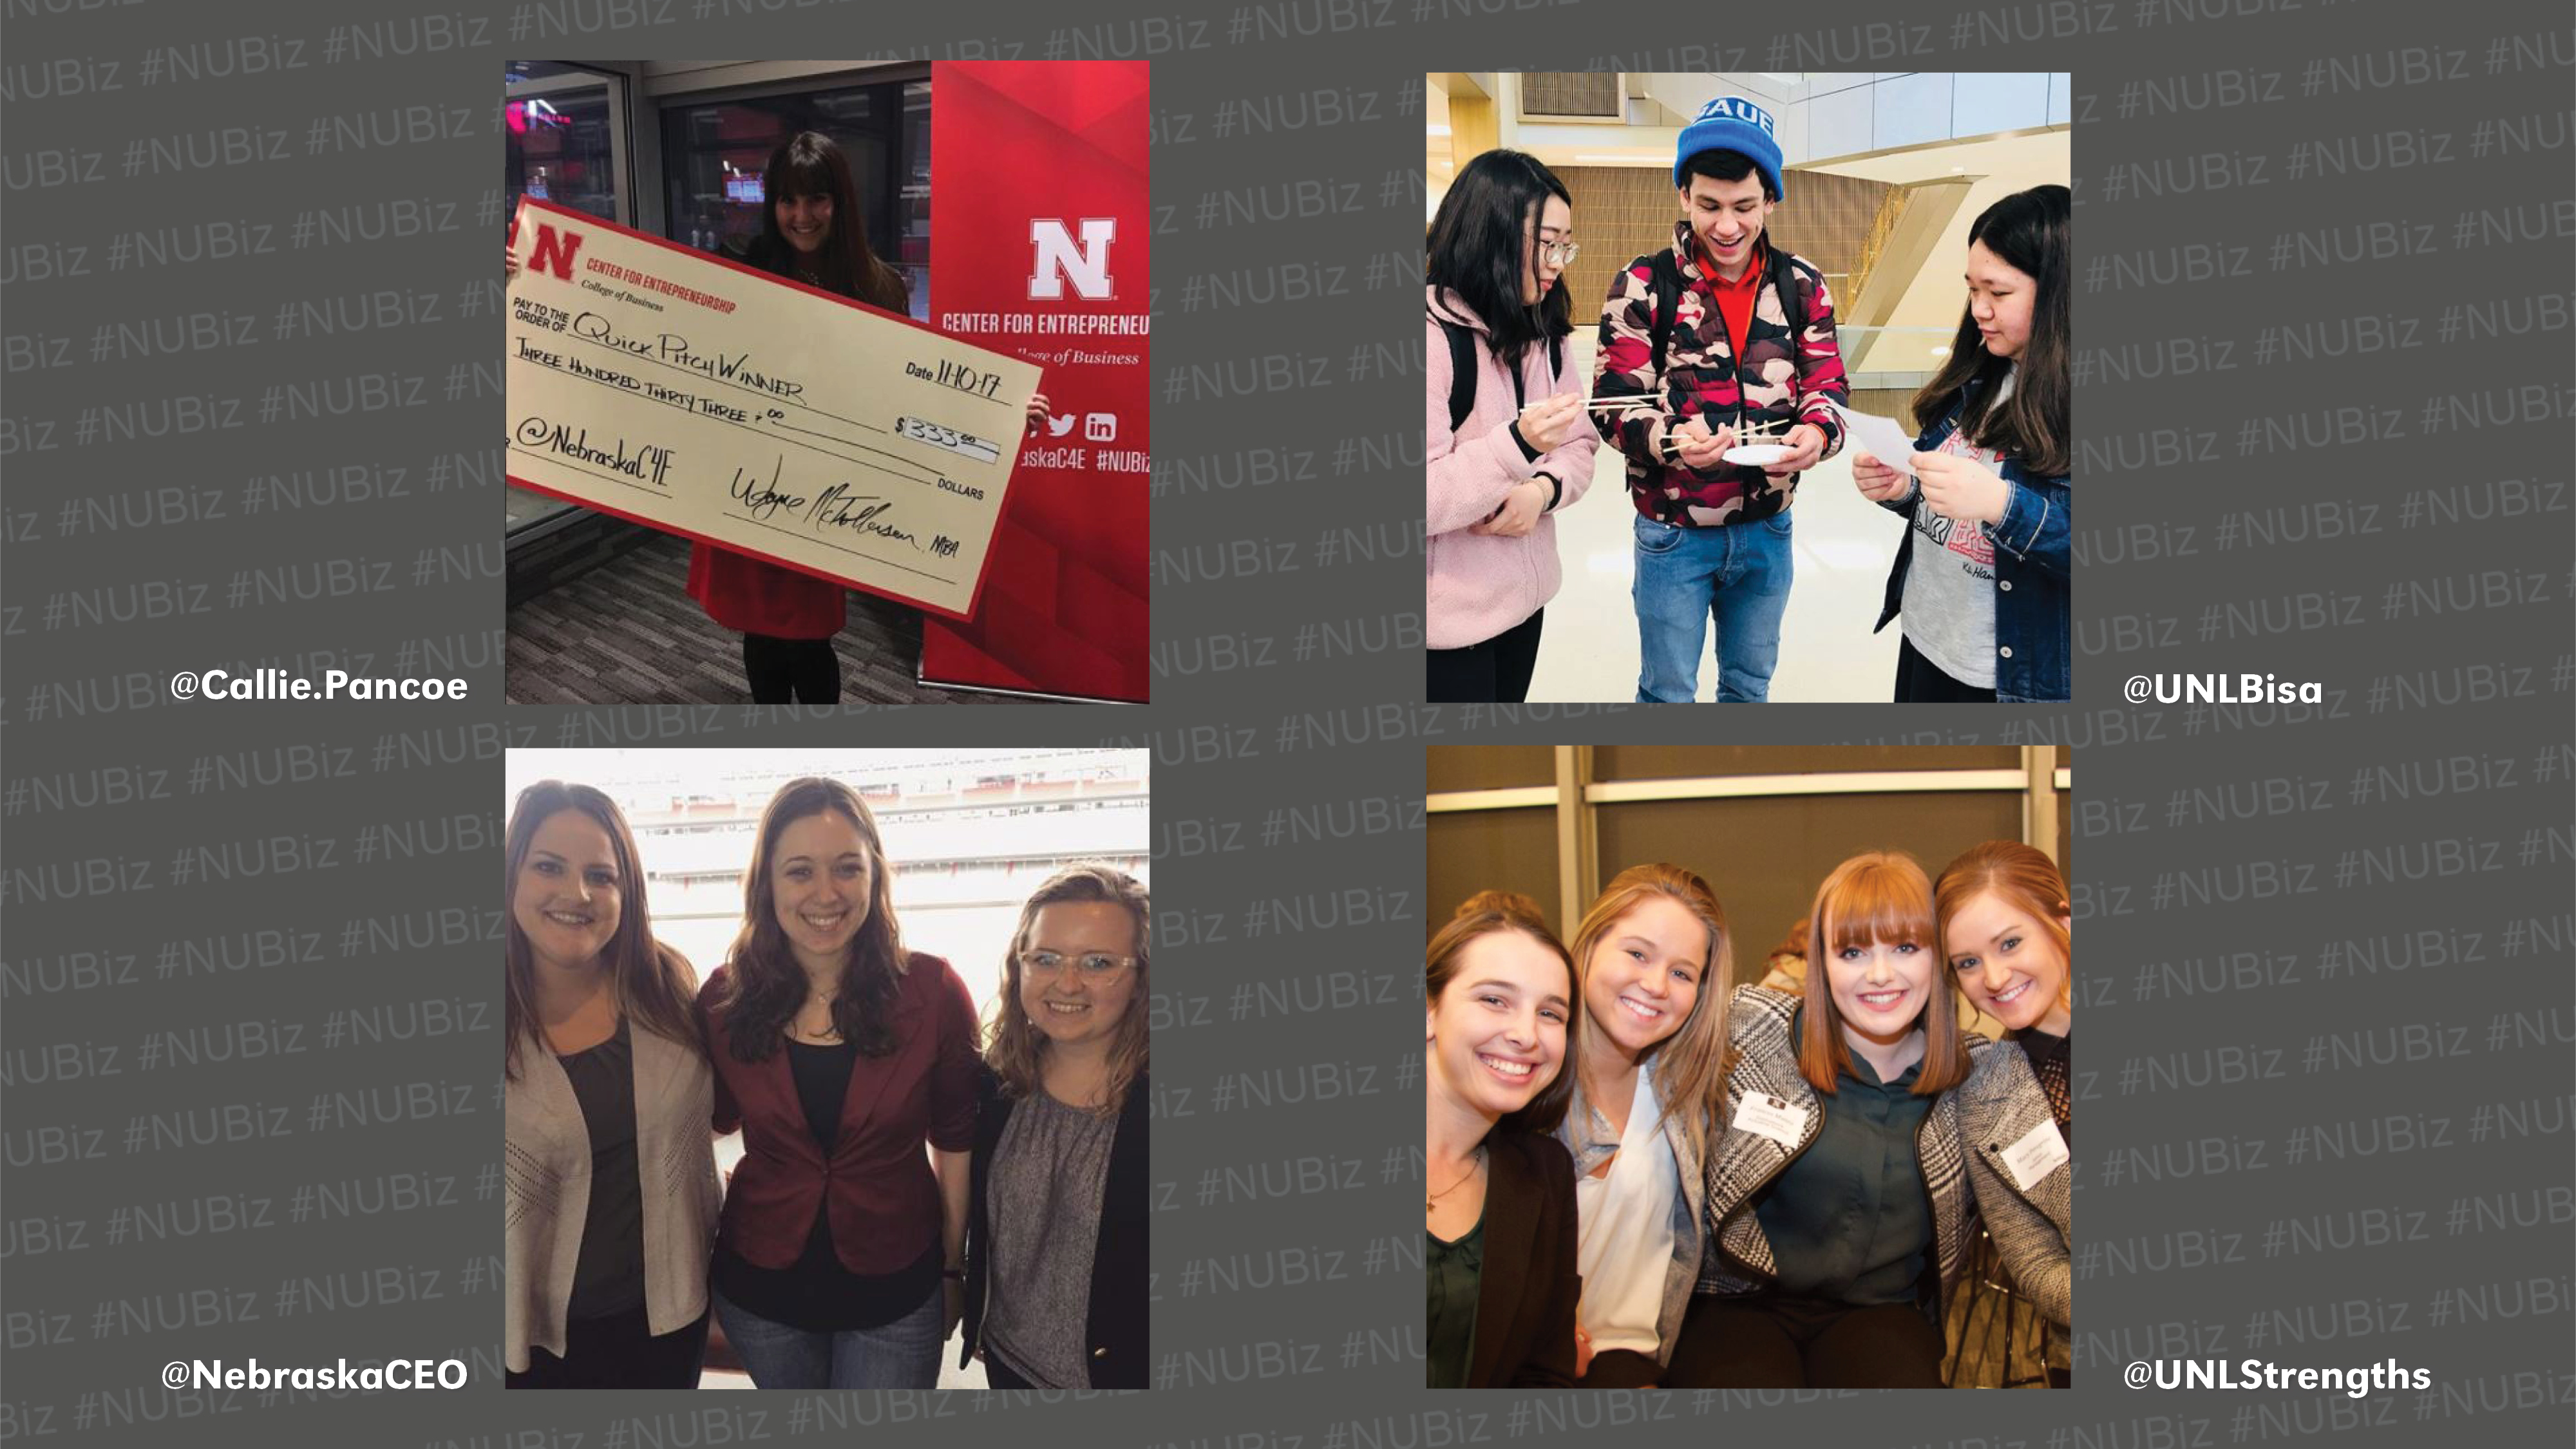 Tag your photos on Instagram and Twitter with #NUBiz to be featured next week. 